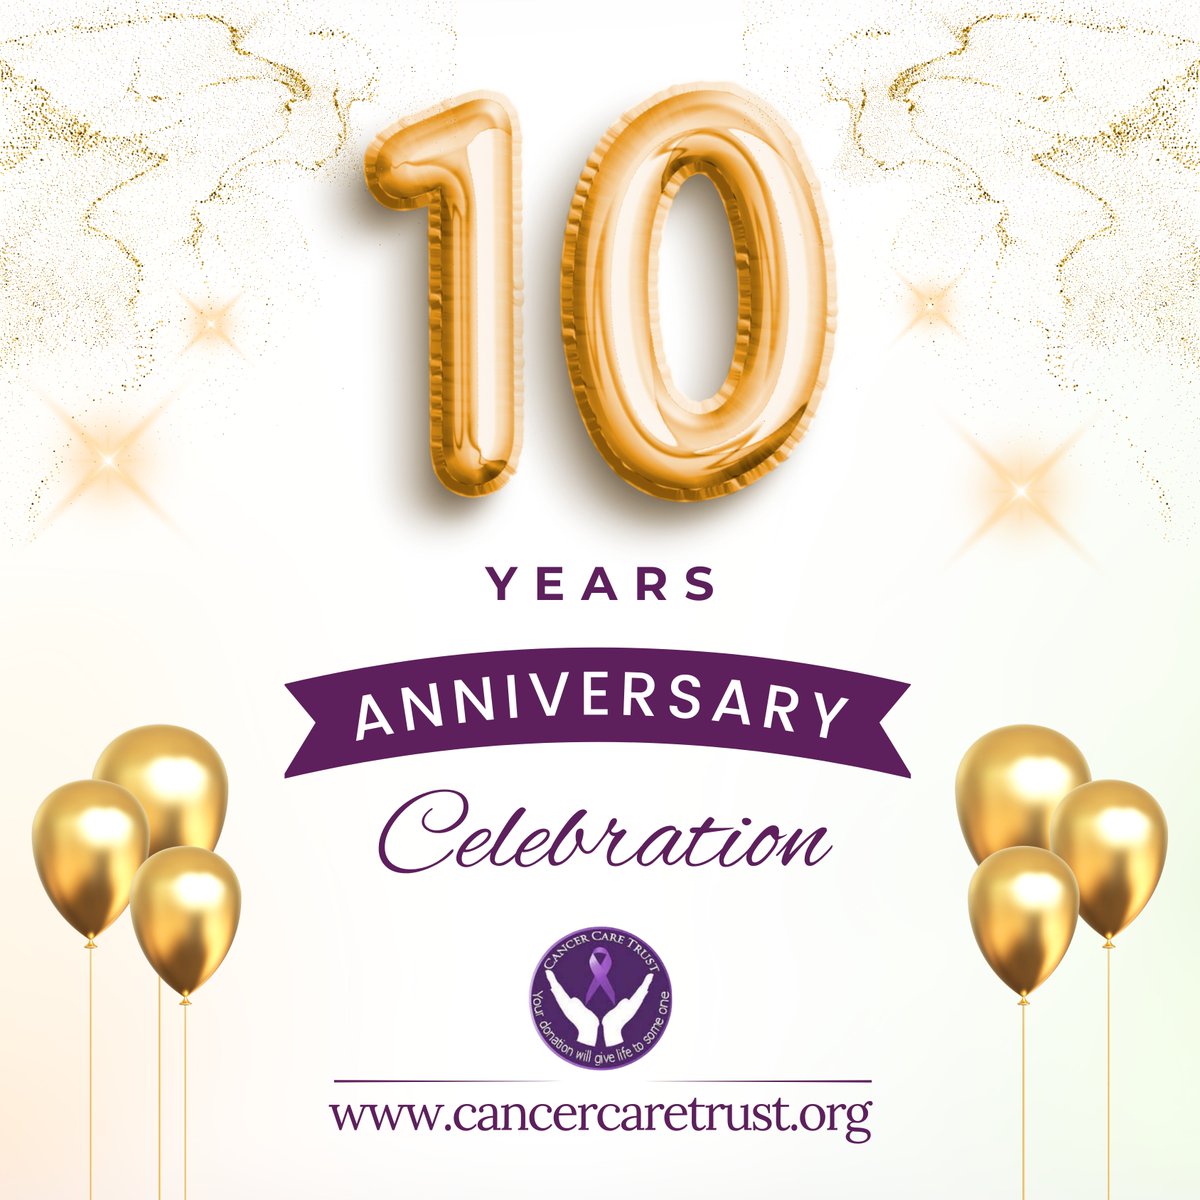 Glimpses of 10th year Anniversary Celebration! ✨🎉 We are glad to announce that CANCER CARE TRUST is celebrating its 10th year of a successful journey. #cct10thanniversary #anniversarycelebration #celebrations #TogetherWeCan #journeytosuccess #TransformingLives